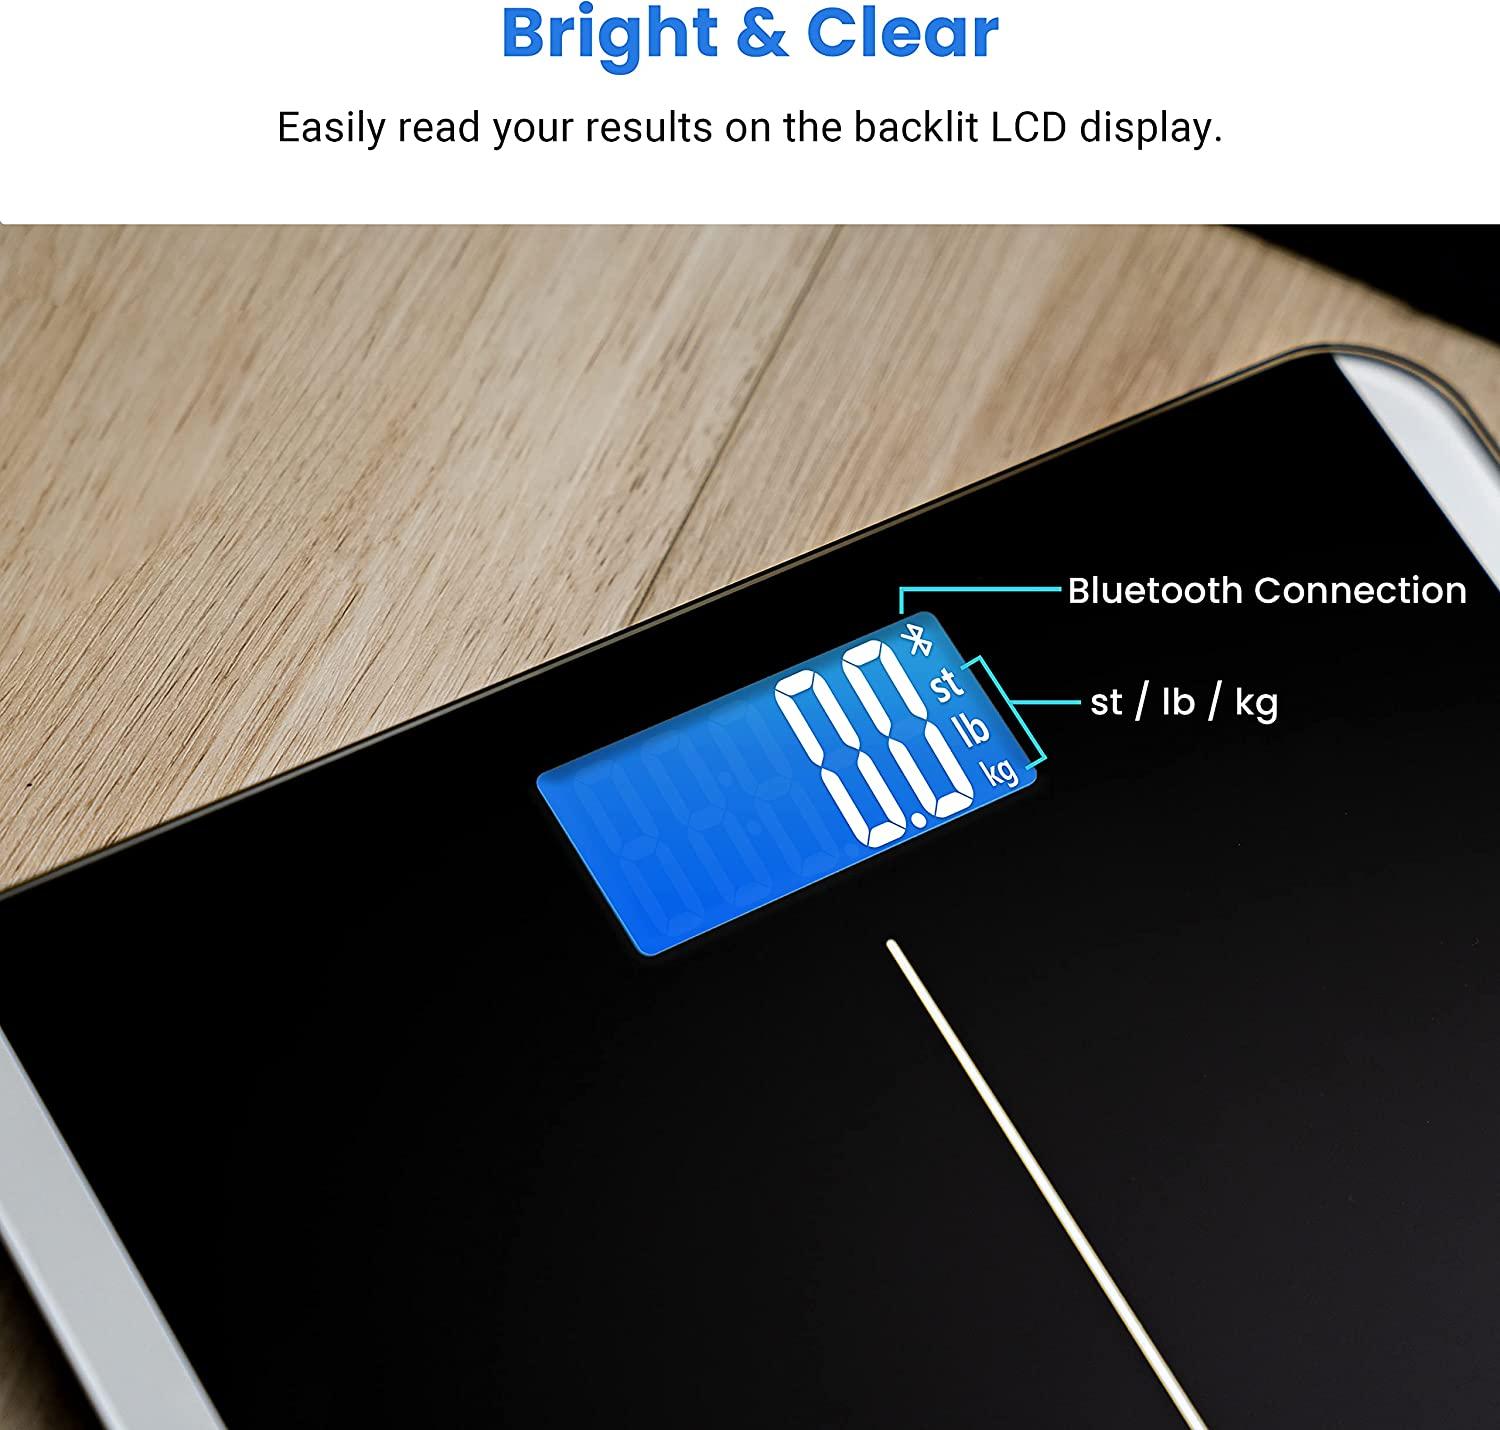 Etekcity Bathroom Scale for Body Weight and BMI, Smart Bluetooth Digital  Weighing Scale, Upgraded Version of eb9380h Scale, Free VeSync App, Rounded